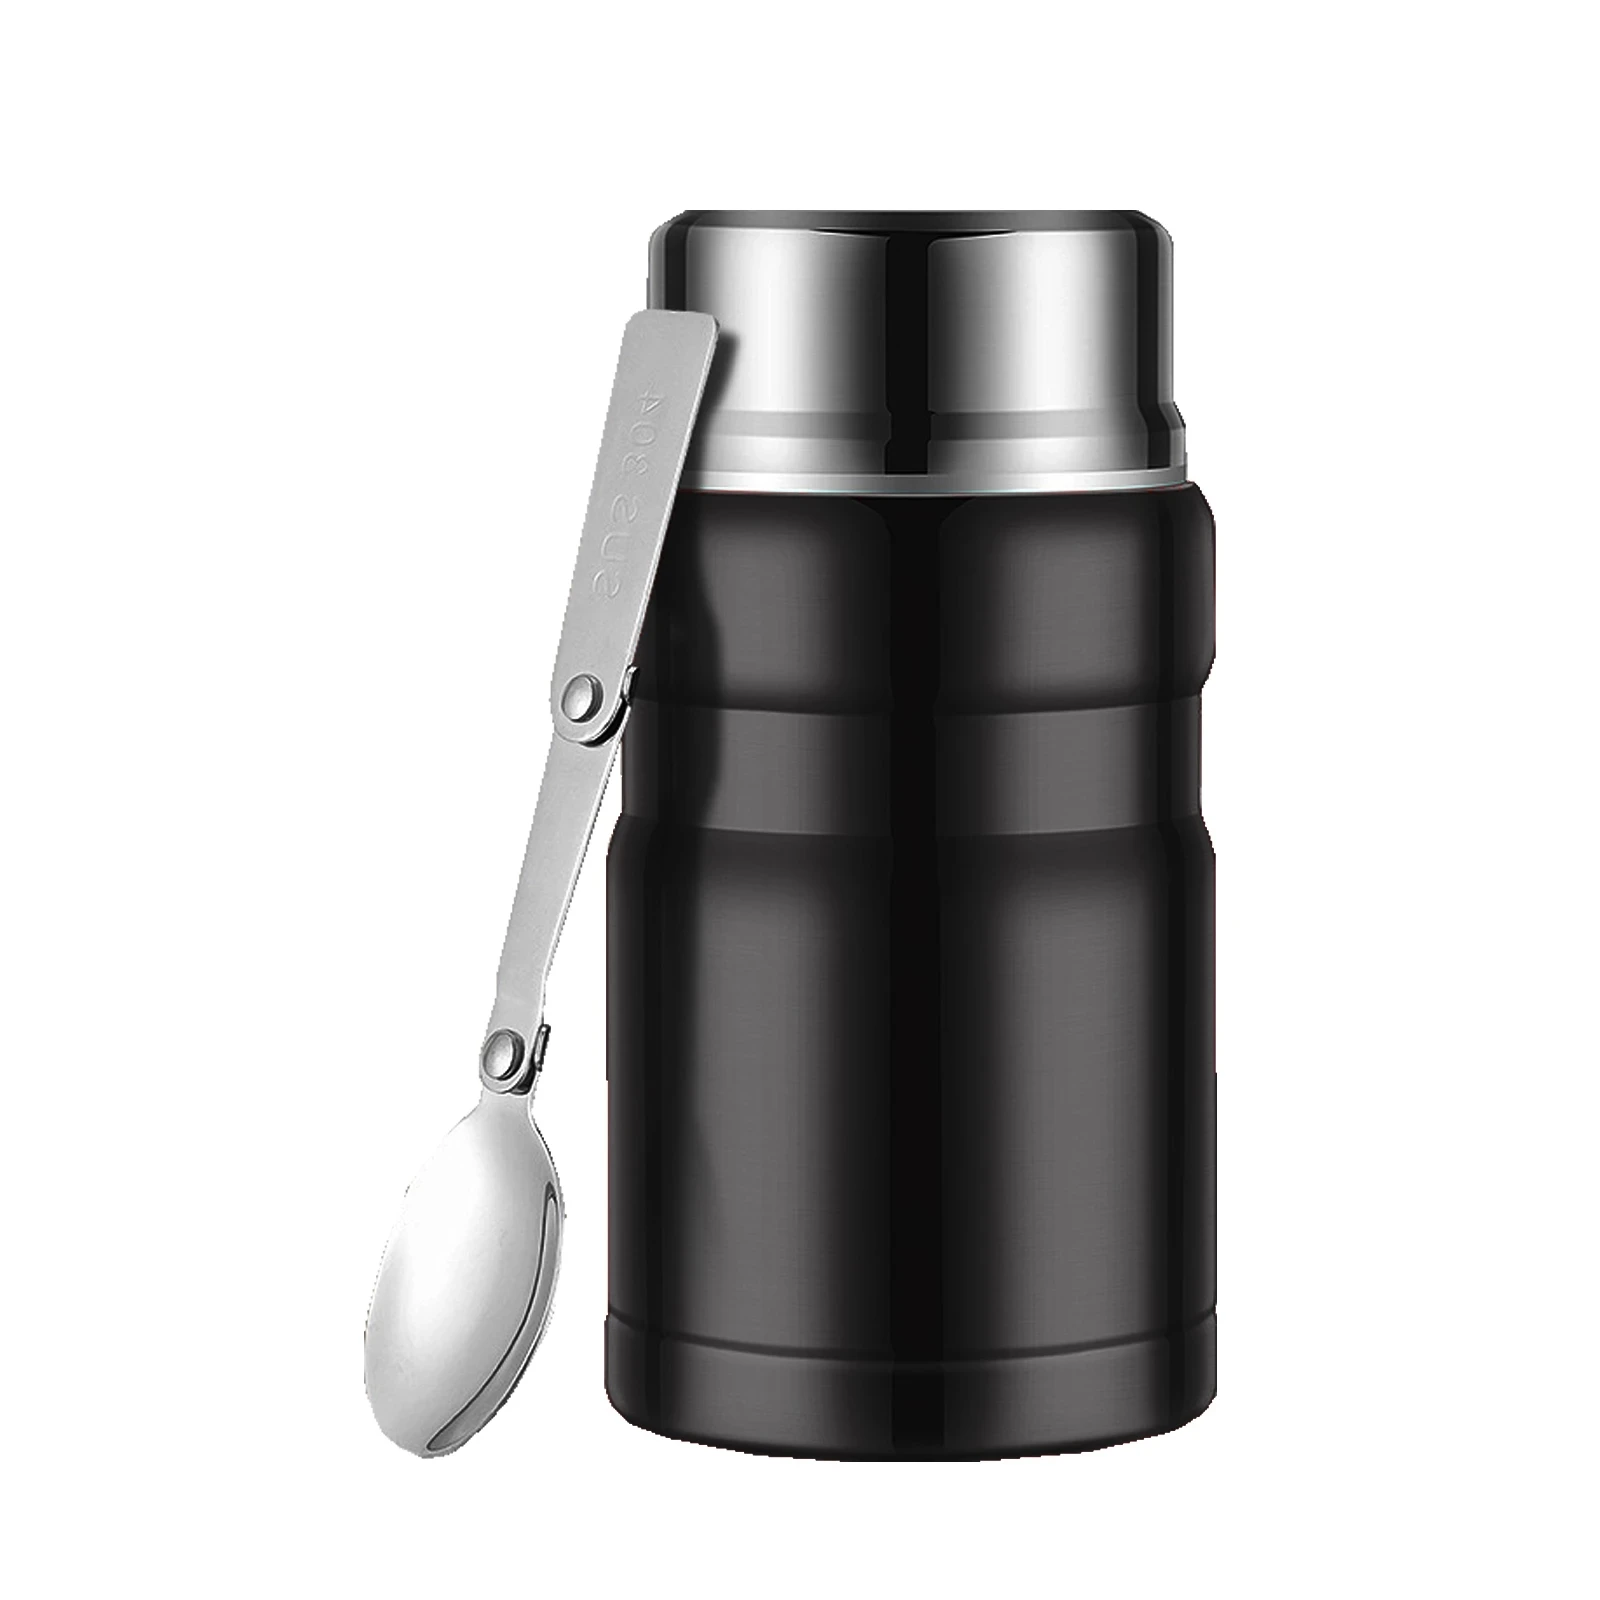 Thermo Pot Stainless Steel Soup Flask